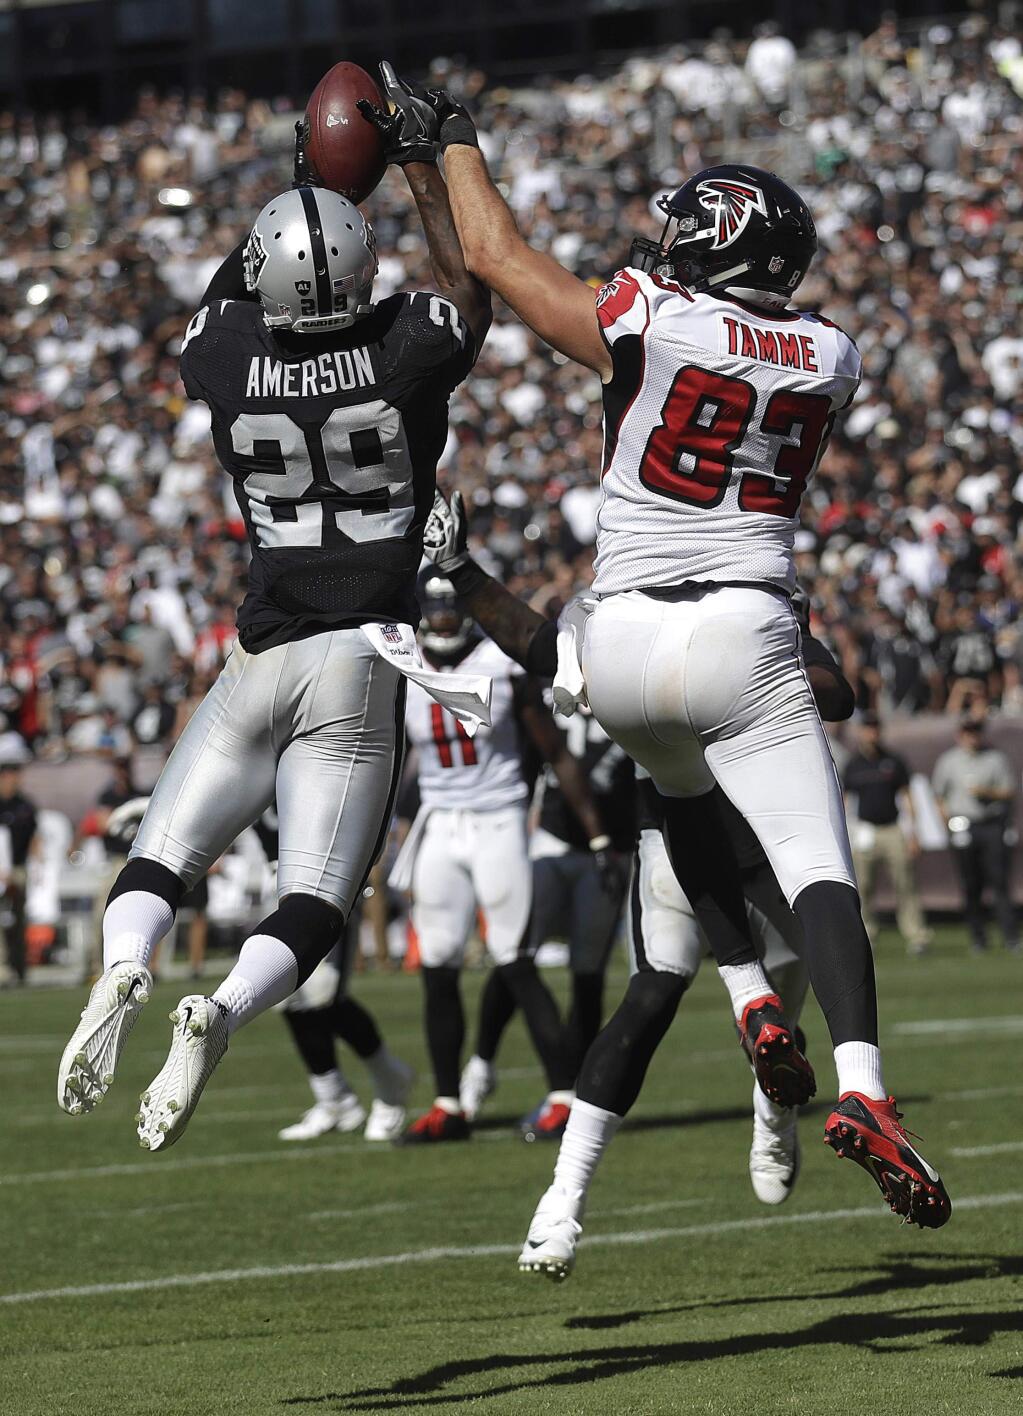 Oakland Raiders cornerback David Amerson (29) intercepts a pass in front of Atlanta Falcons tight end Jacob Tamme (83) during the second half of an NFL football game in Oakland, Calif., Sunday, Sept. 18, 2016. (AP Photo/Marcio Jose Sanchez)